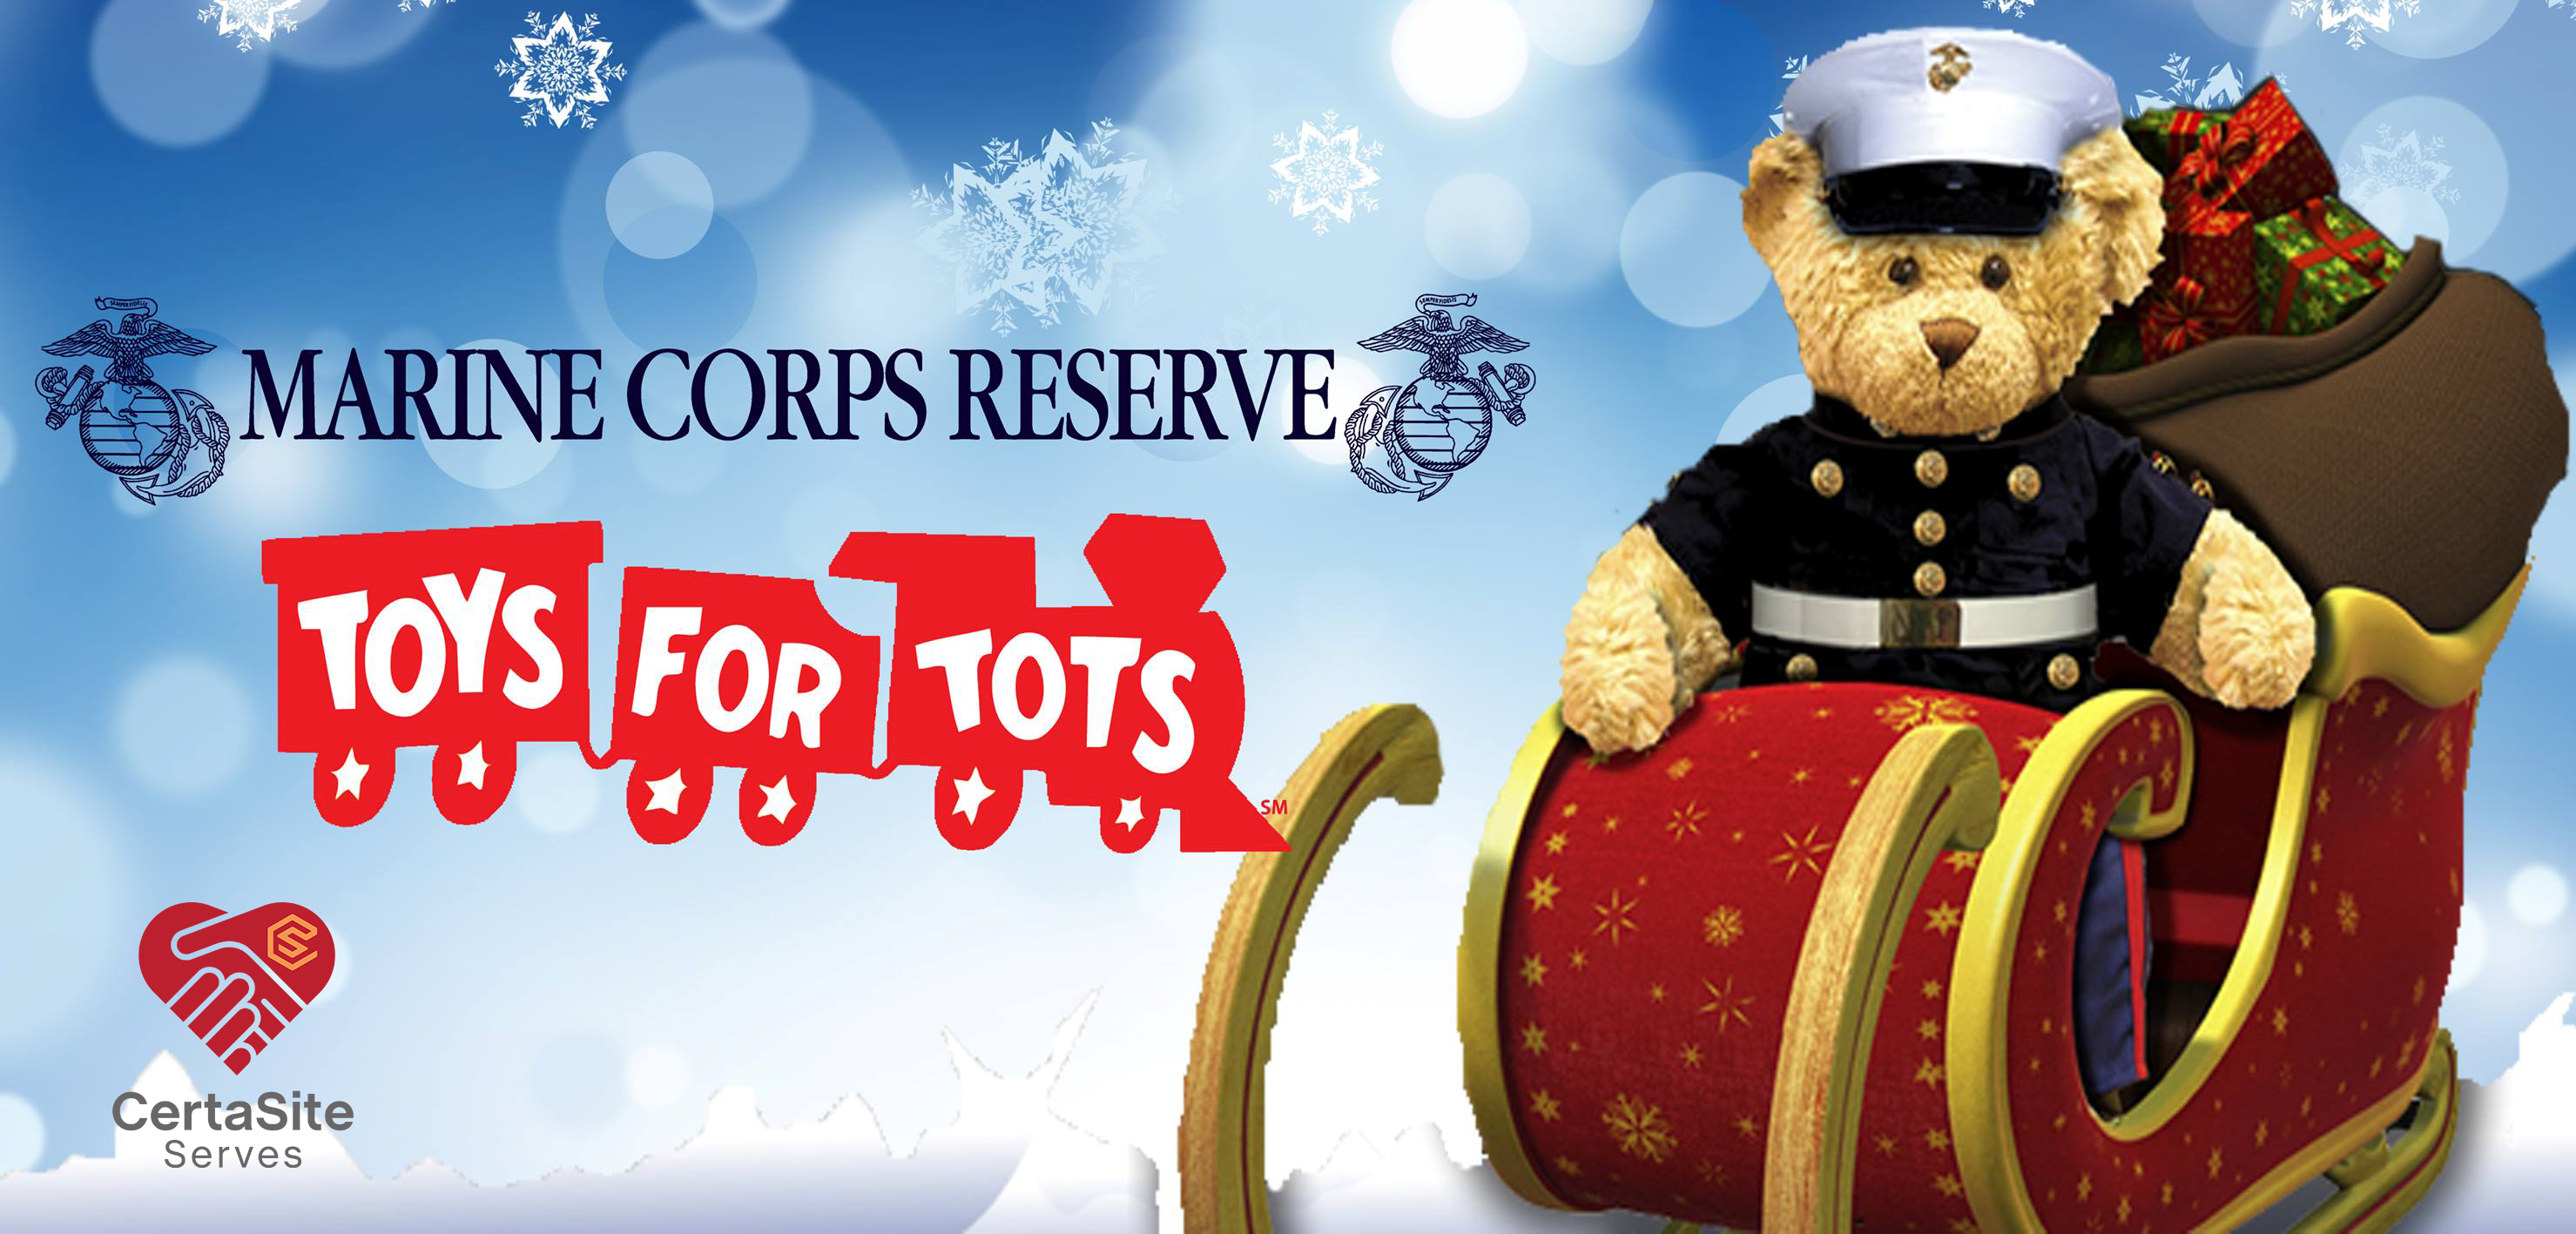 Certasite Serves Toys For Tots